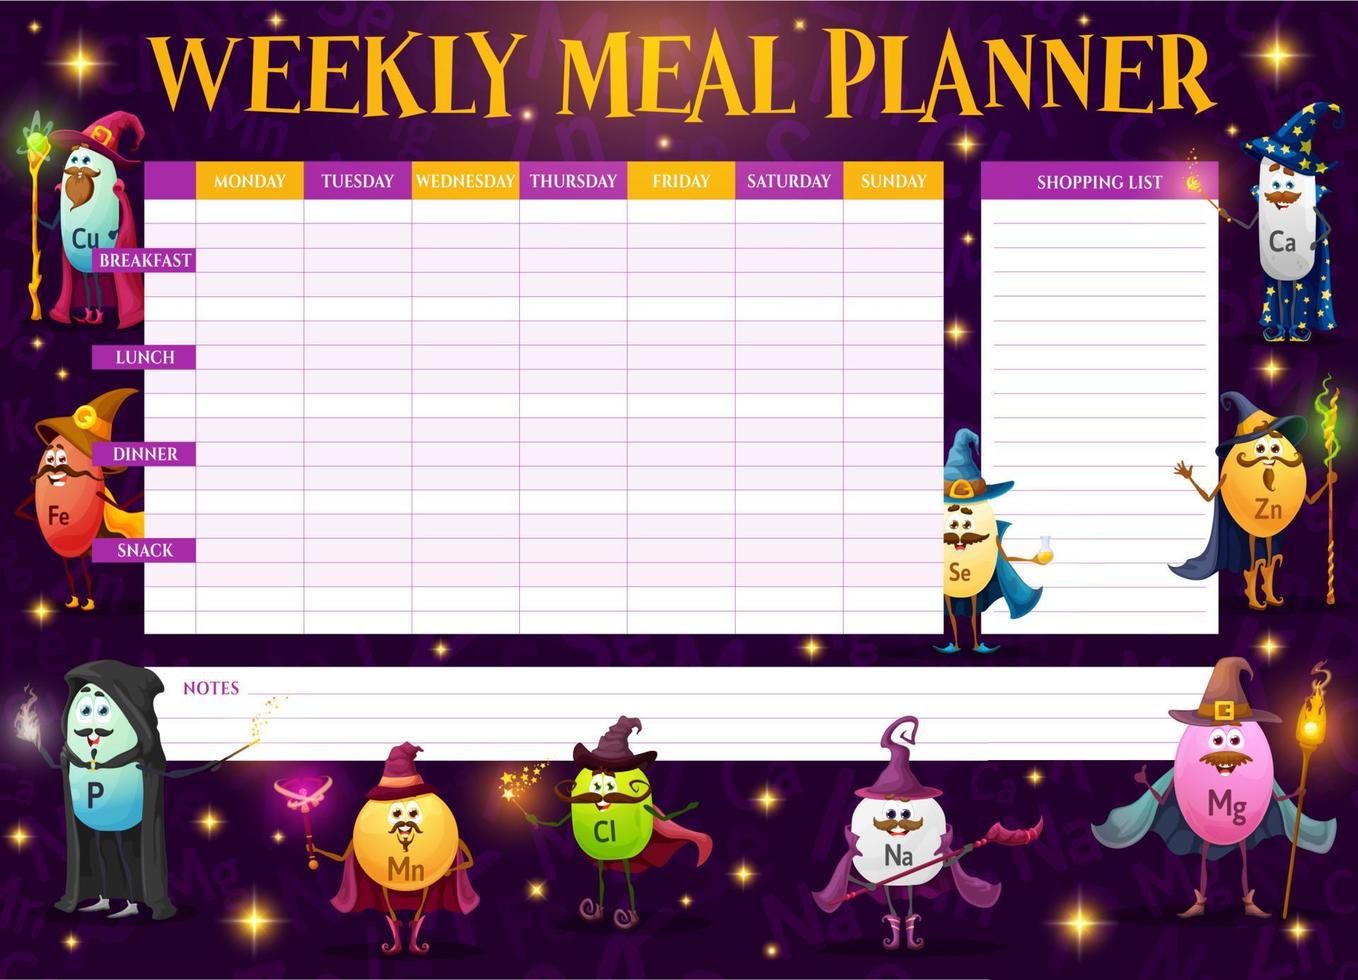 Weekly meal planner, micronutrients wizards, mages vector